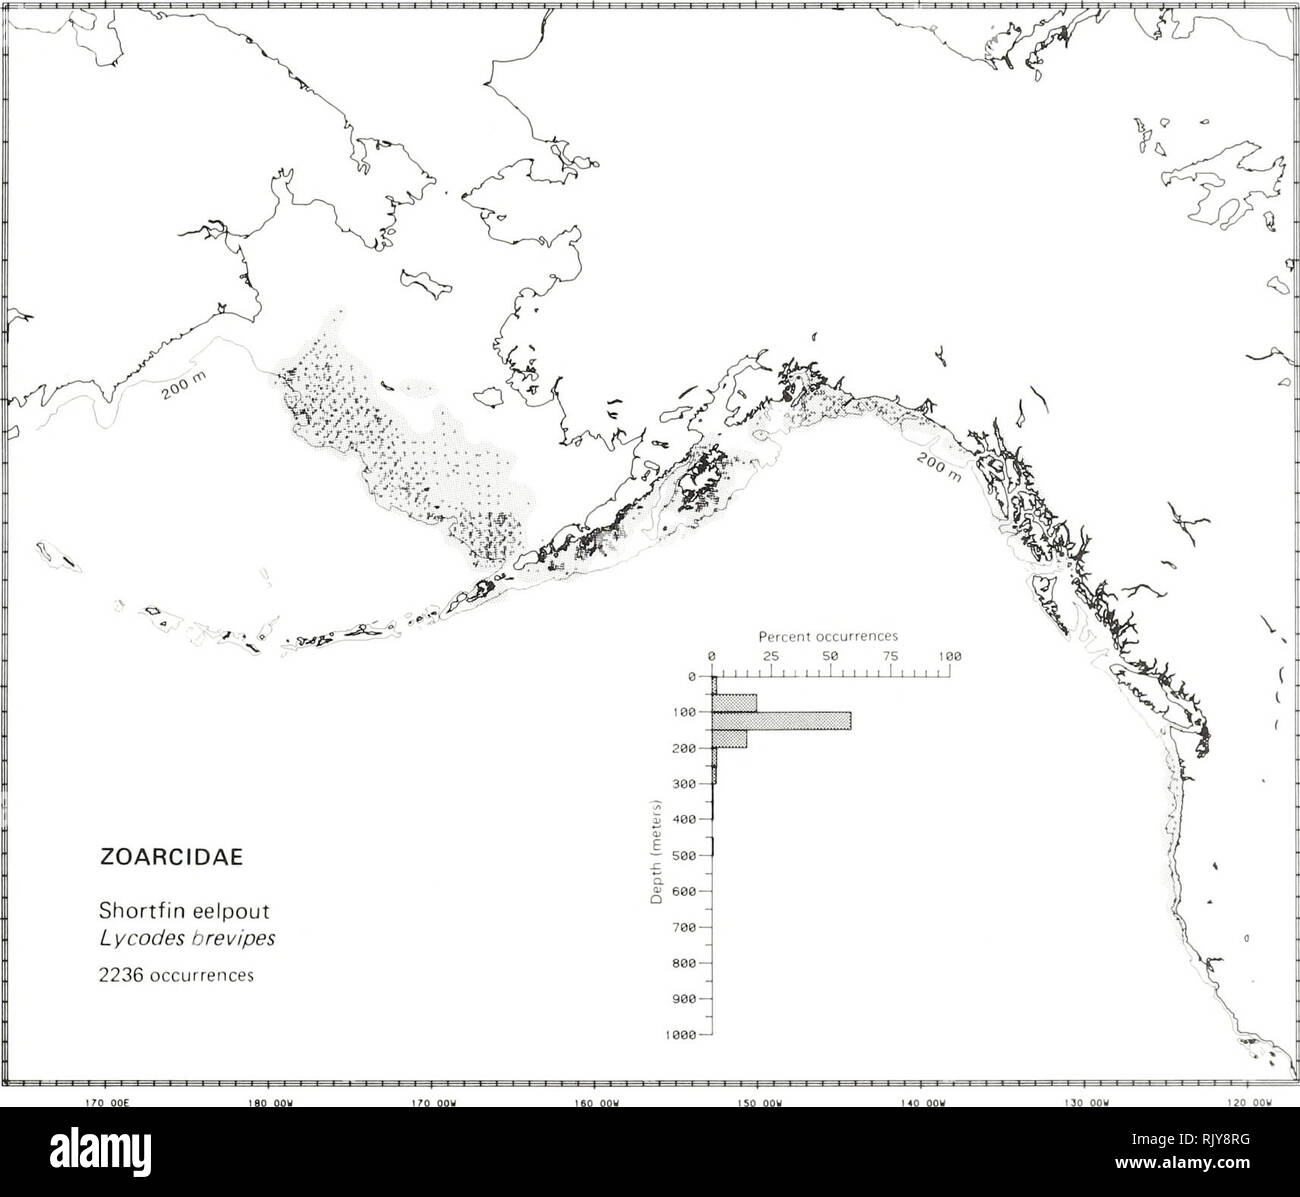 . Atlas and zoogeography of common fishes in the Bering Sea and Northeastern Pacific / M. James Allen, Gary B. Smith. Fishes Bering Sea Geographical distribution.. SHORTFIN EELPOUT, Lycodes brevipes Bean 1890 Zoarcidae: Eelpouts Literature Reported from the Sea of Okhotsk to the Anadyr Gulf in the Bering Sea, in the Aleutian Islands, southeast to Oregon (Andriyashev 1954; Okada and Kobayashi 1968; Eschmeyer and Herald 1983), at depths of 27 to 973 m (Fedorov 1973a; Eschmeyer and Herald 1983). Survey data Found from east of Cape Navarin, southeast along the outer shelf and slope in the eastern  Stock Photo